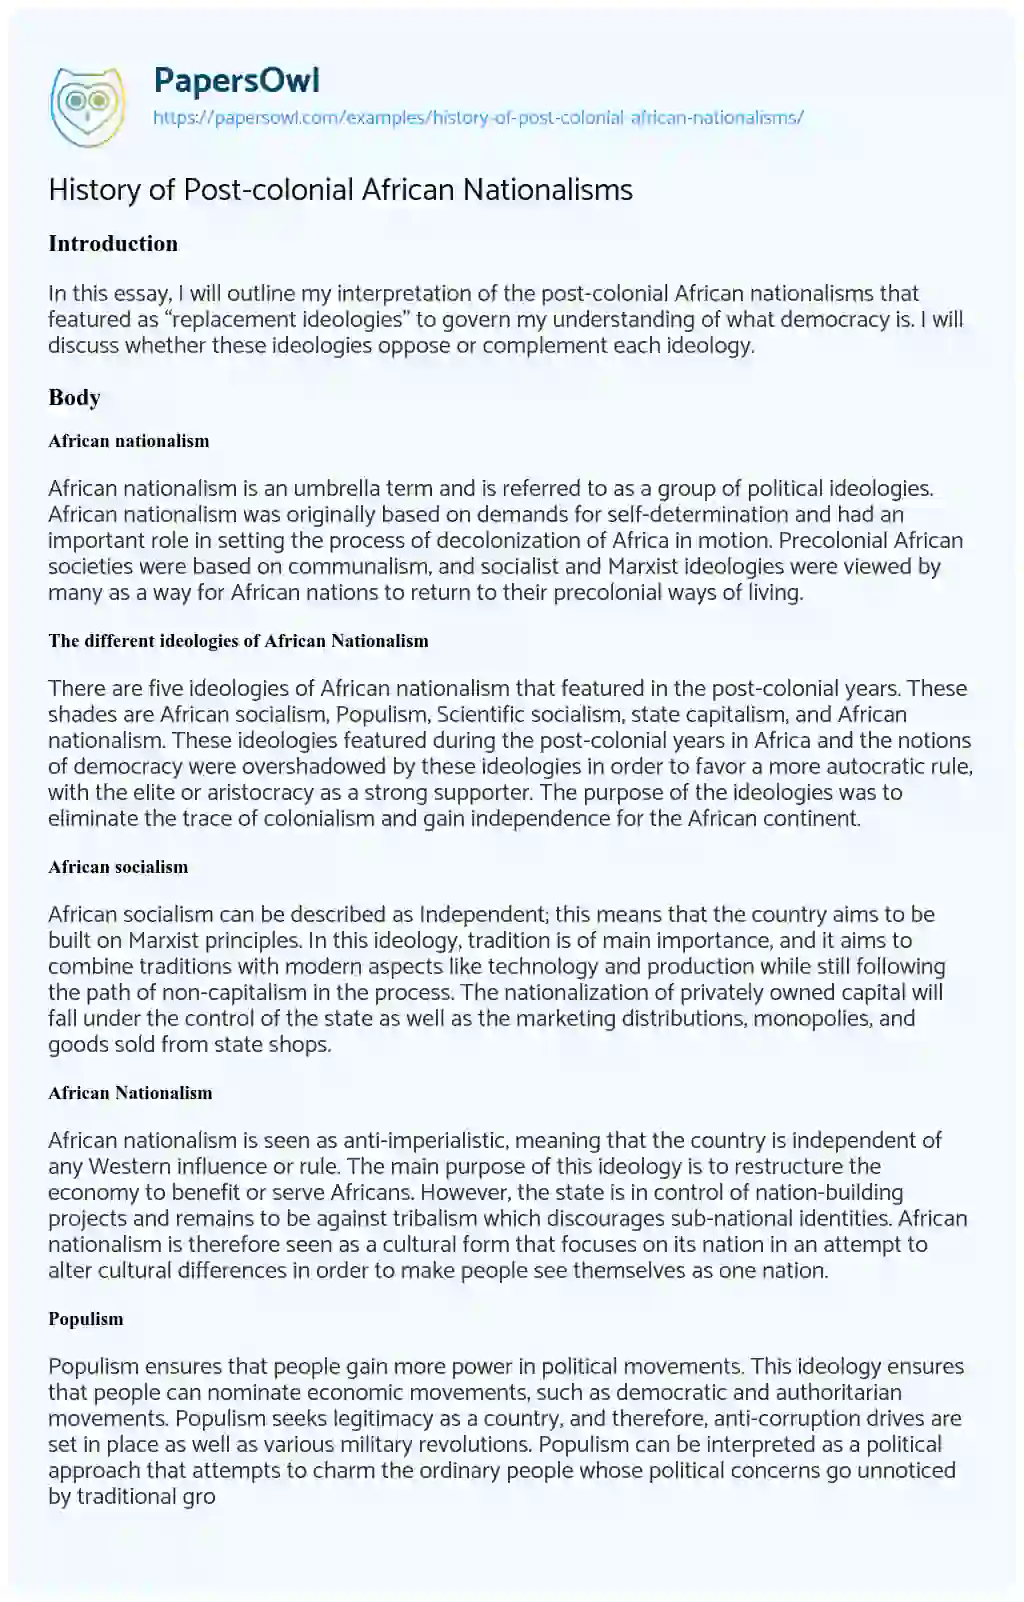 Essay on History of Post-colonial African Nationalisms